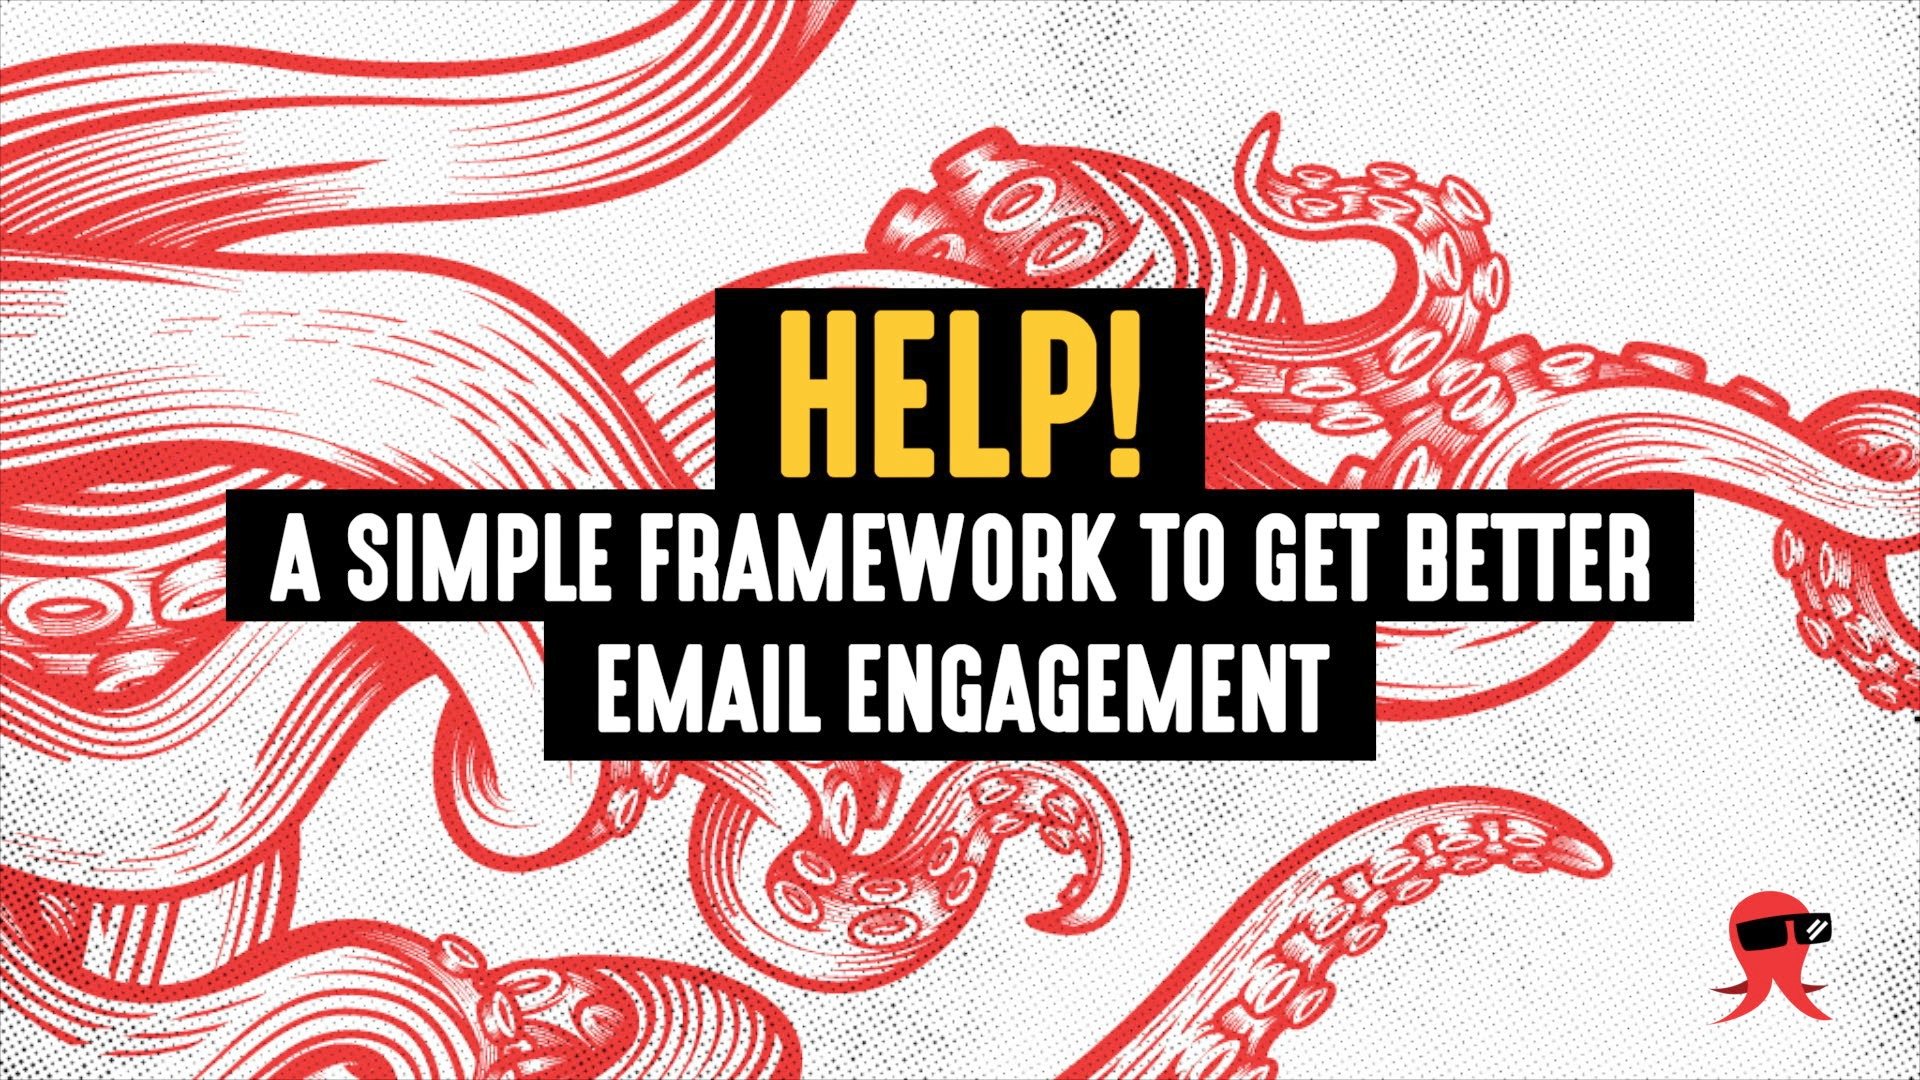 HELP! A Simple Framework to Get Better Email Engagement